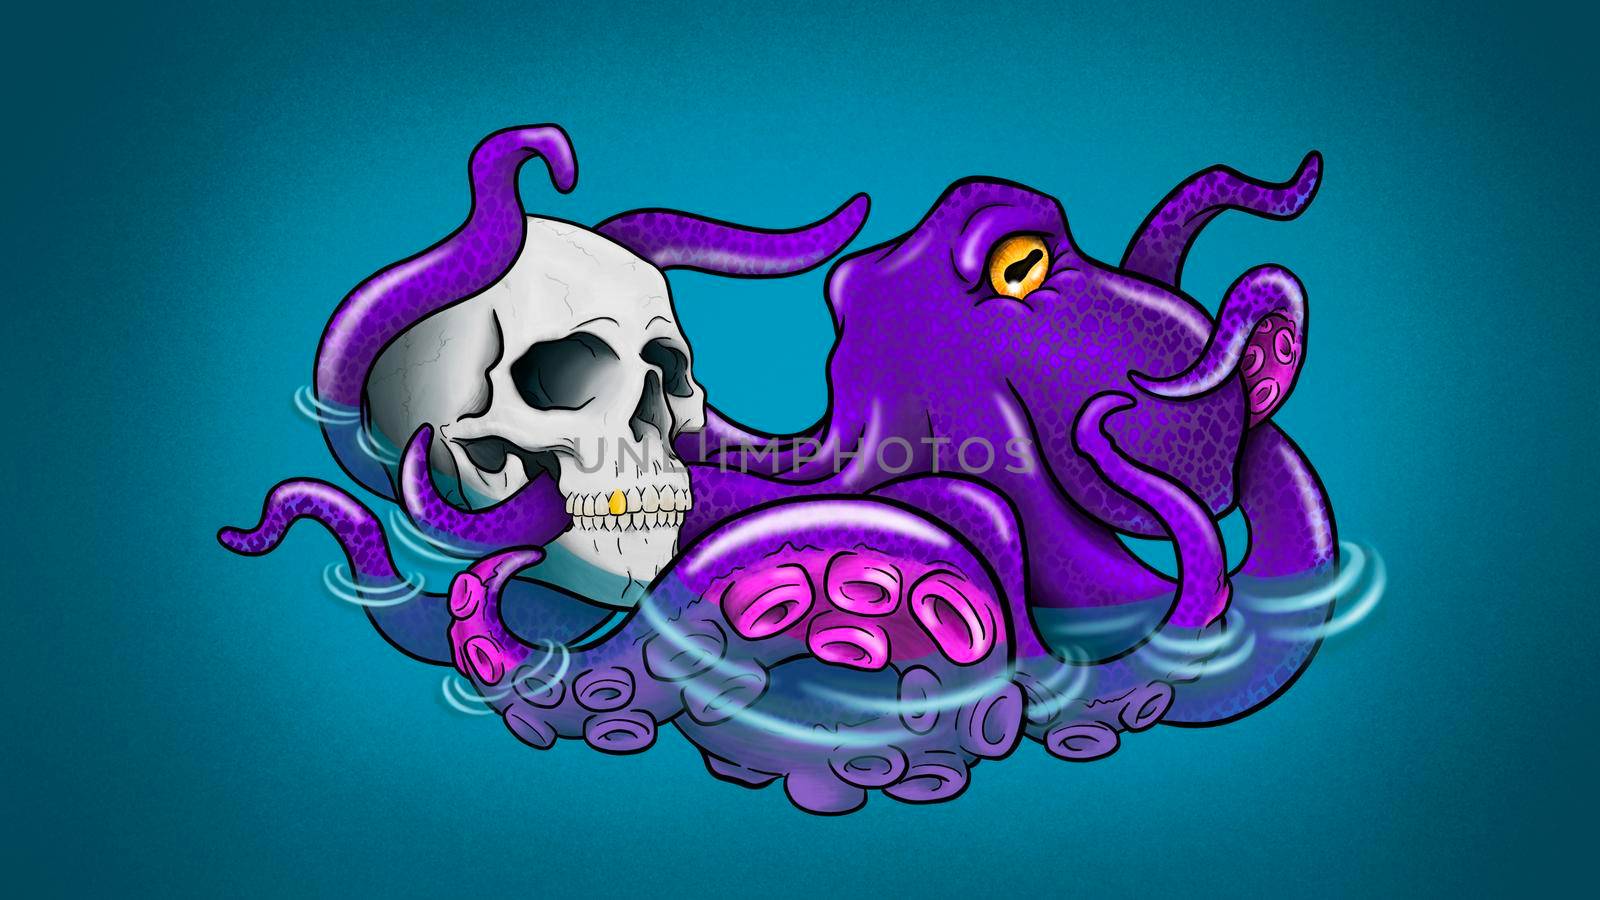 background on the desktop colored bright octopus with a skull background picture